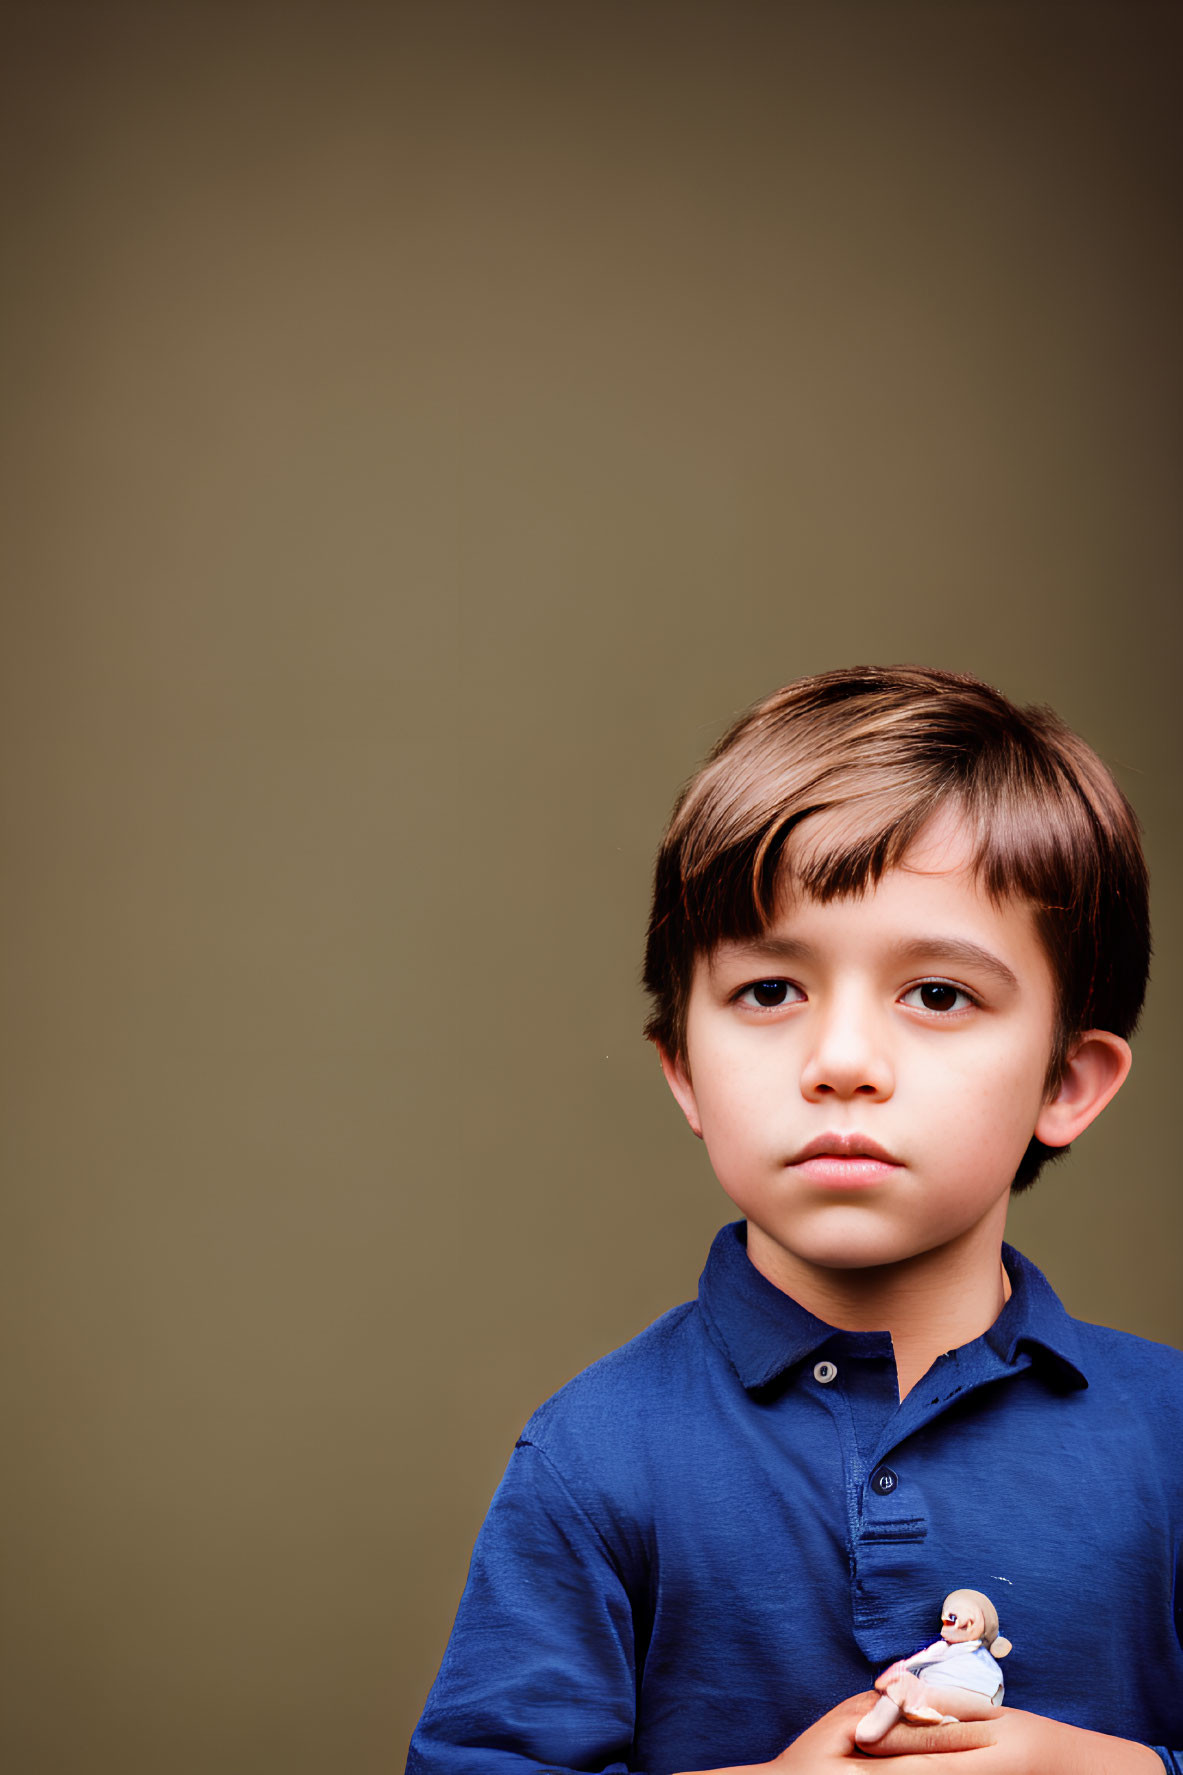 Young boy in blue shirt holding figurine on brown background